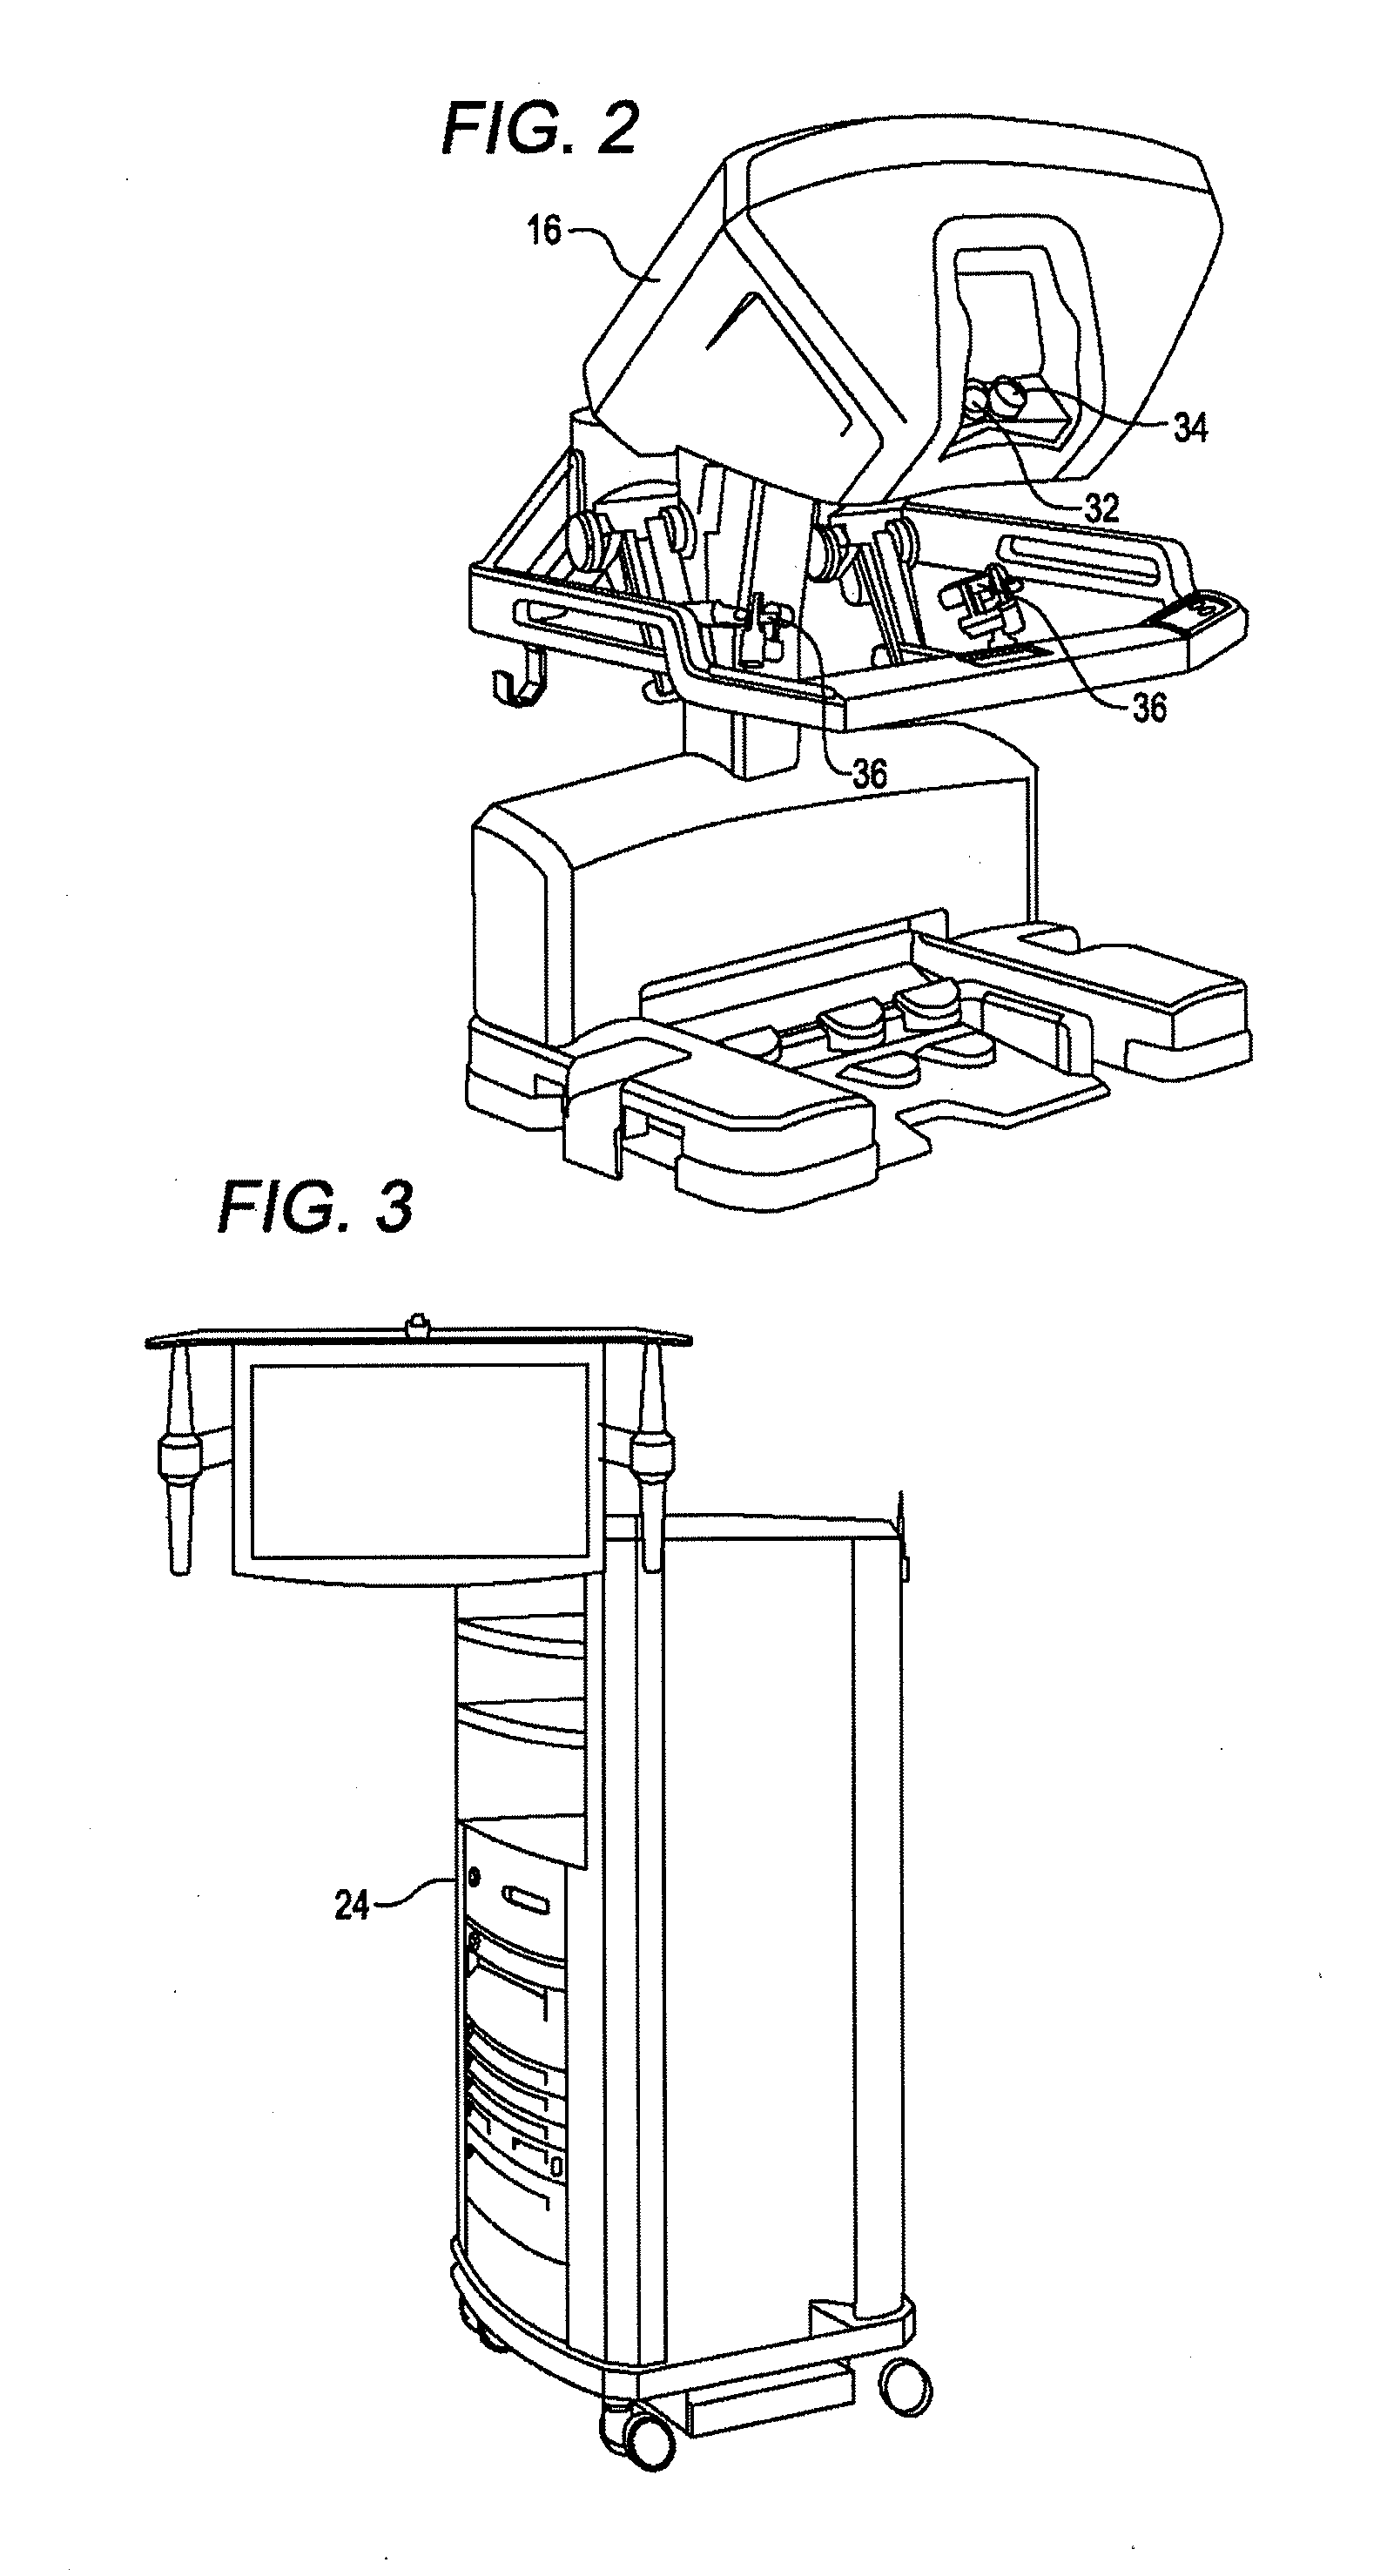 Method for passively decoupling torque applied by a remote actuator into an independently rotating member